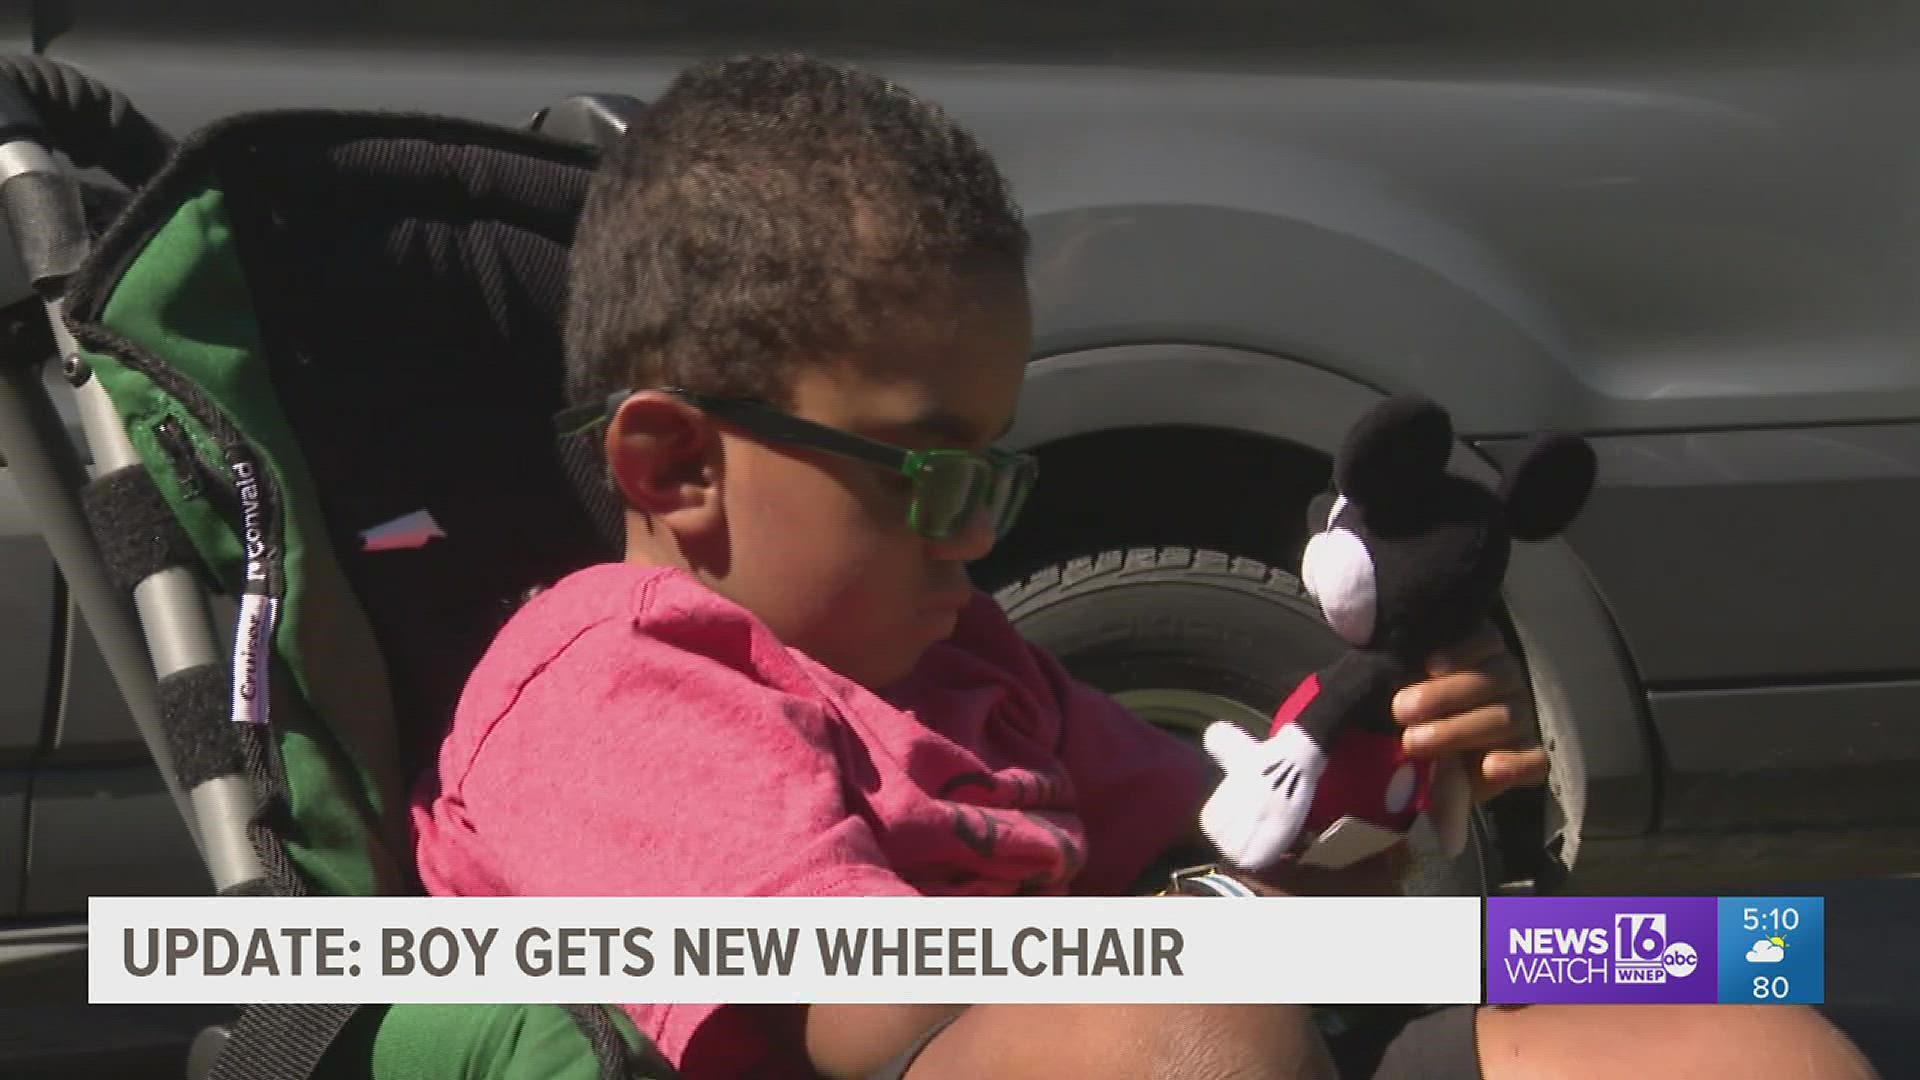 In Monroe County, the community has come through in a big way for a little boy whose wheelchair was stolen.